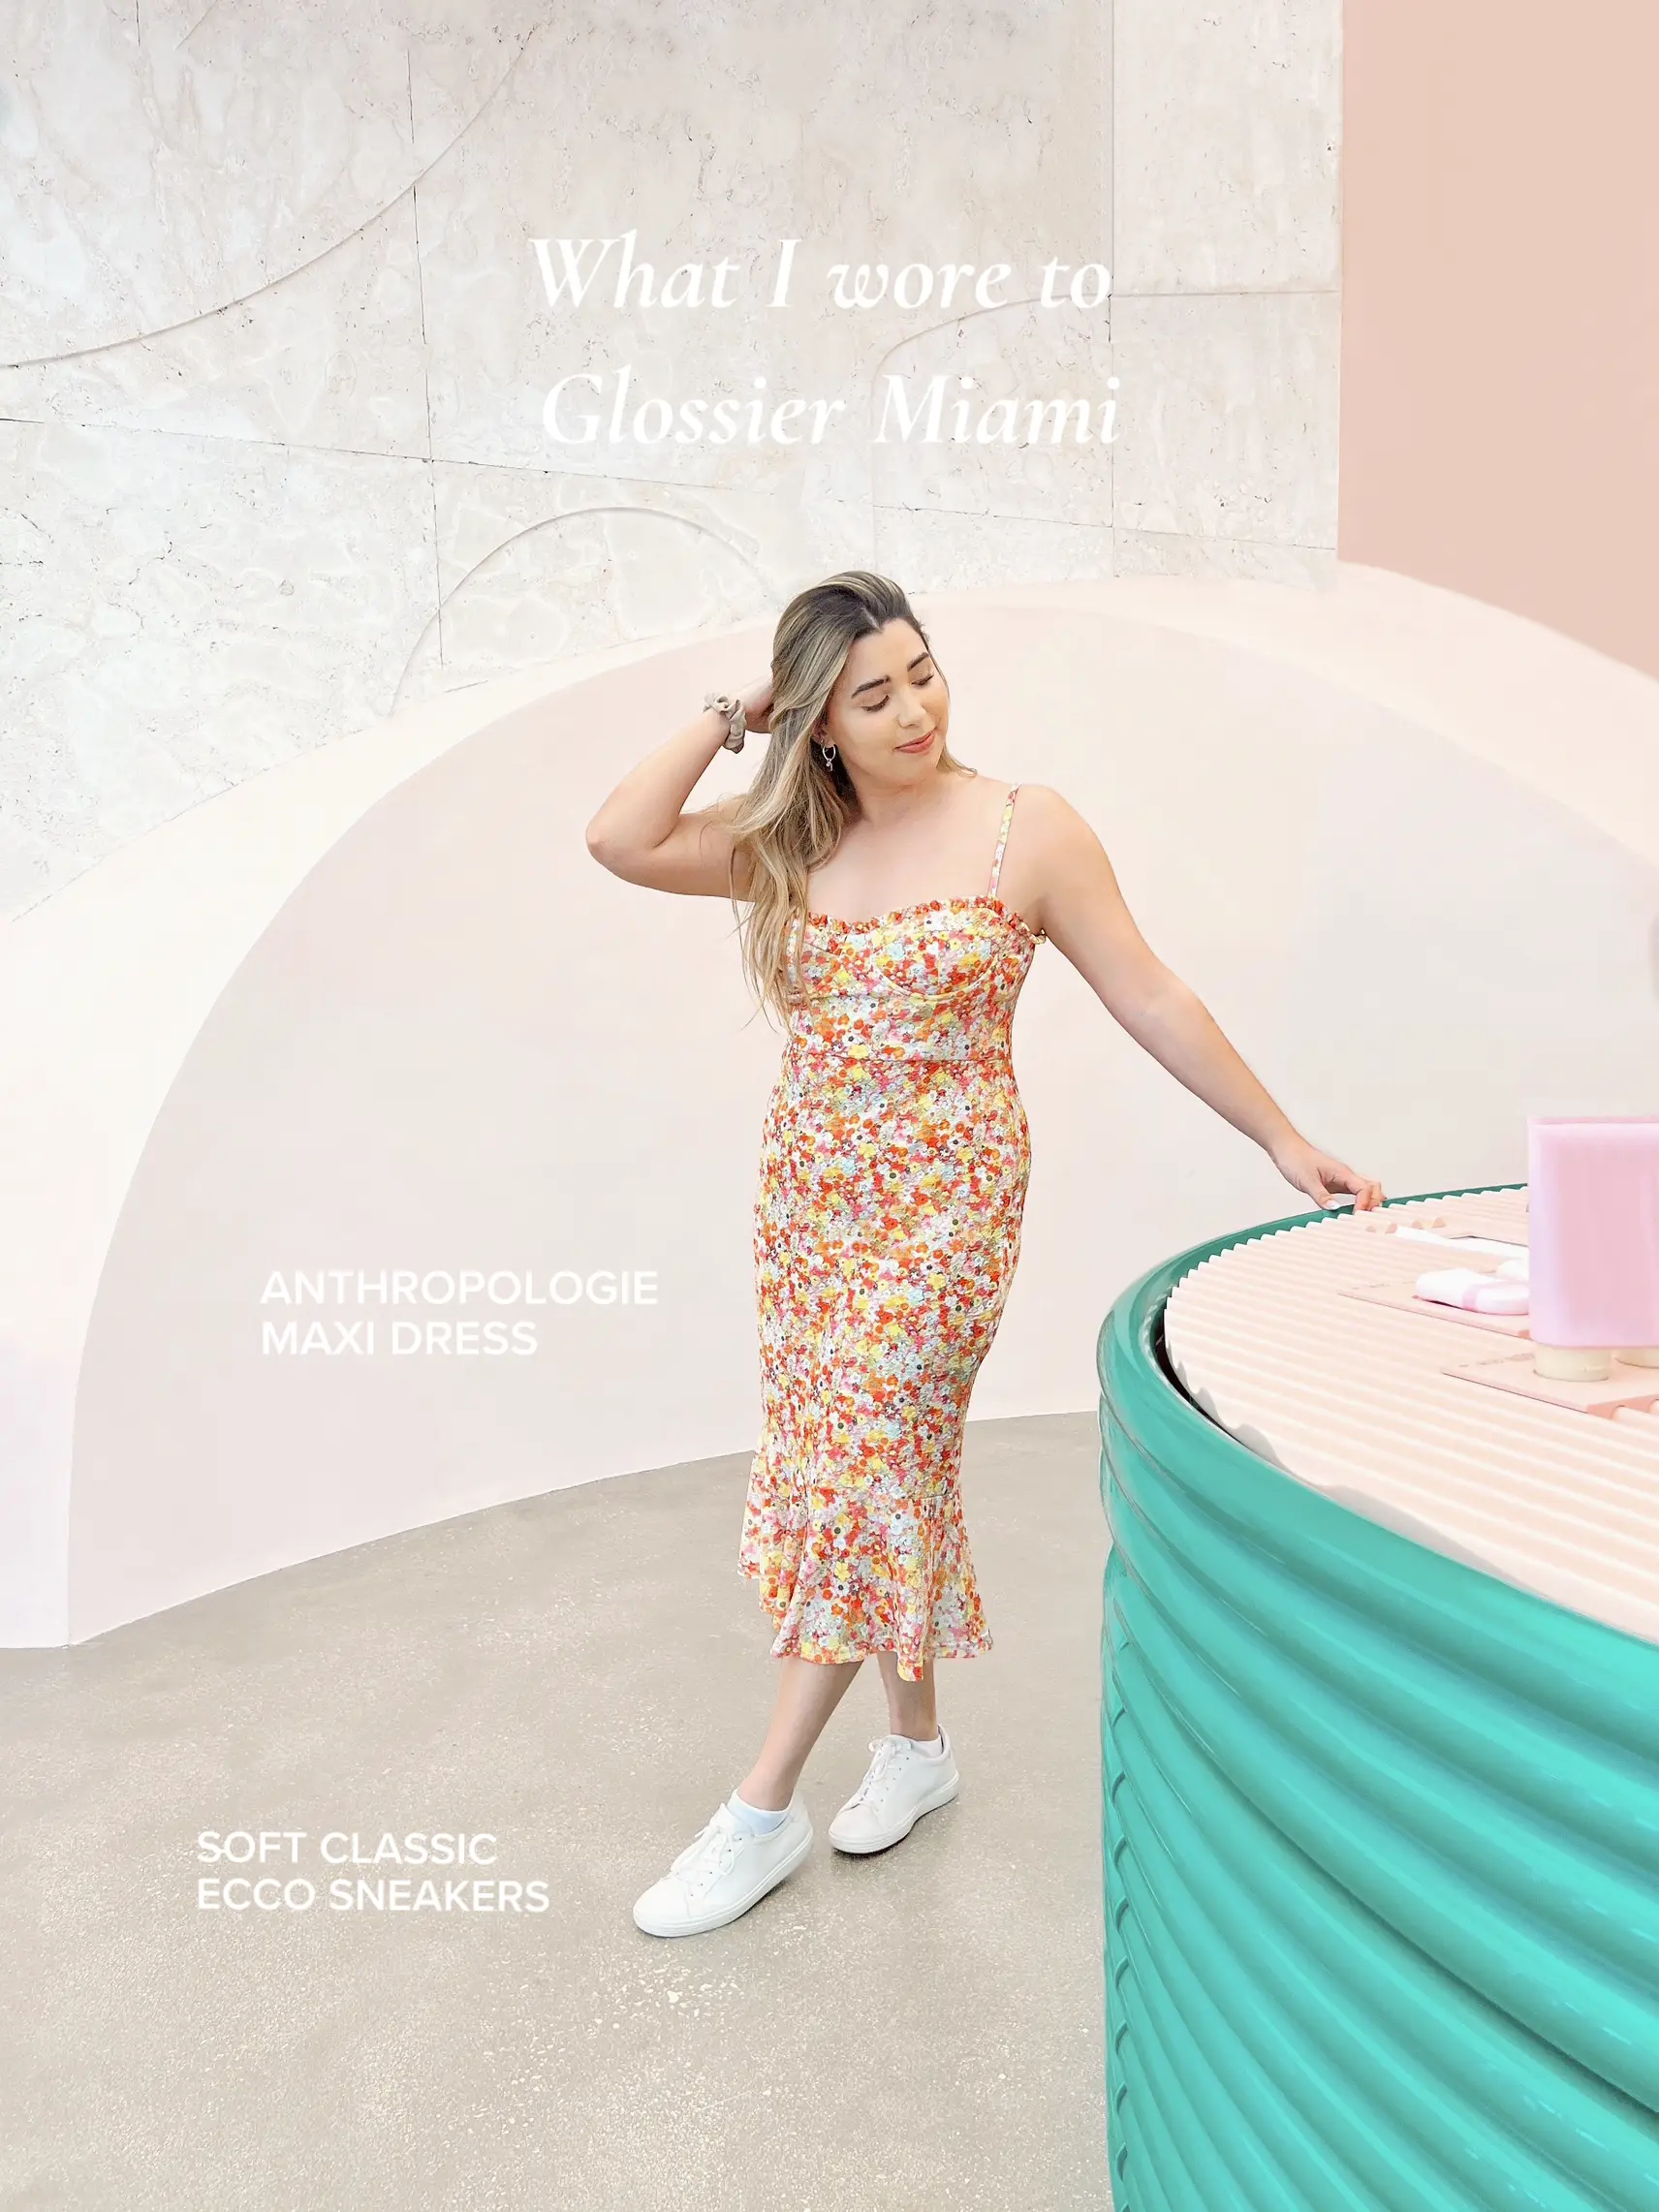 20 top Anthropologie Dress for Glossier Miami ideas in 2024